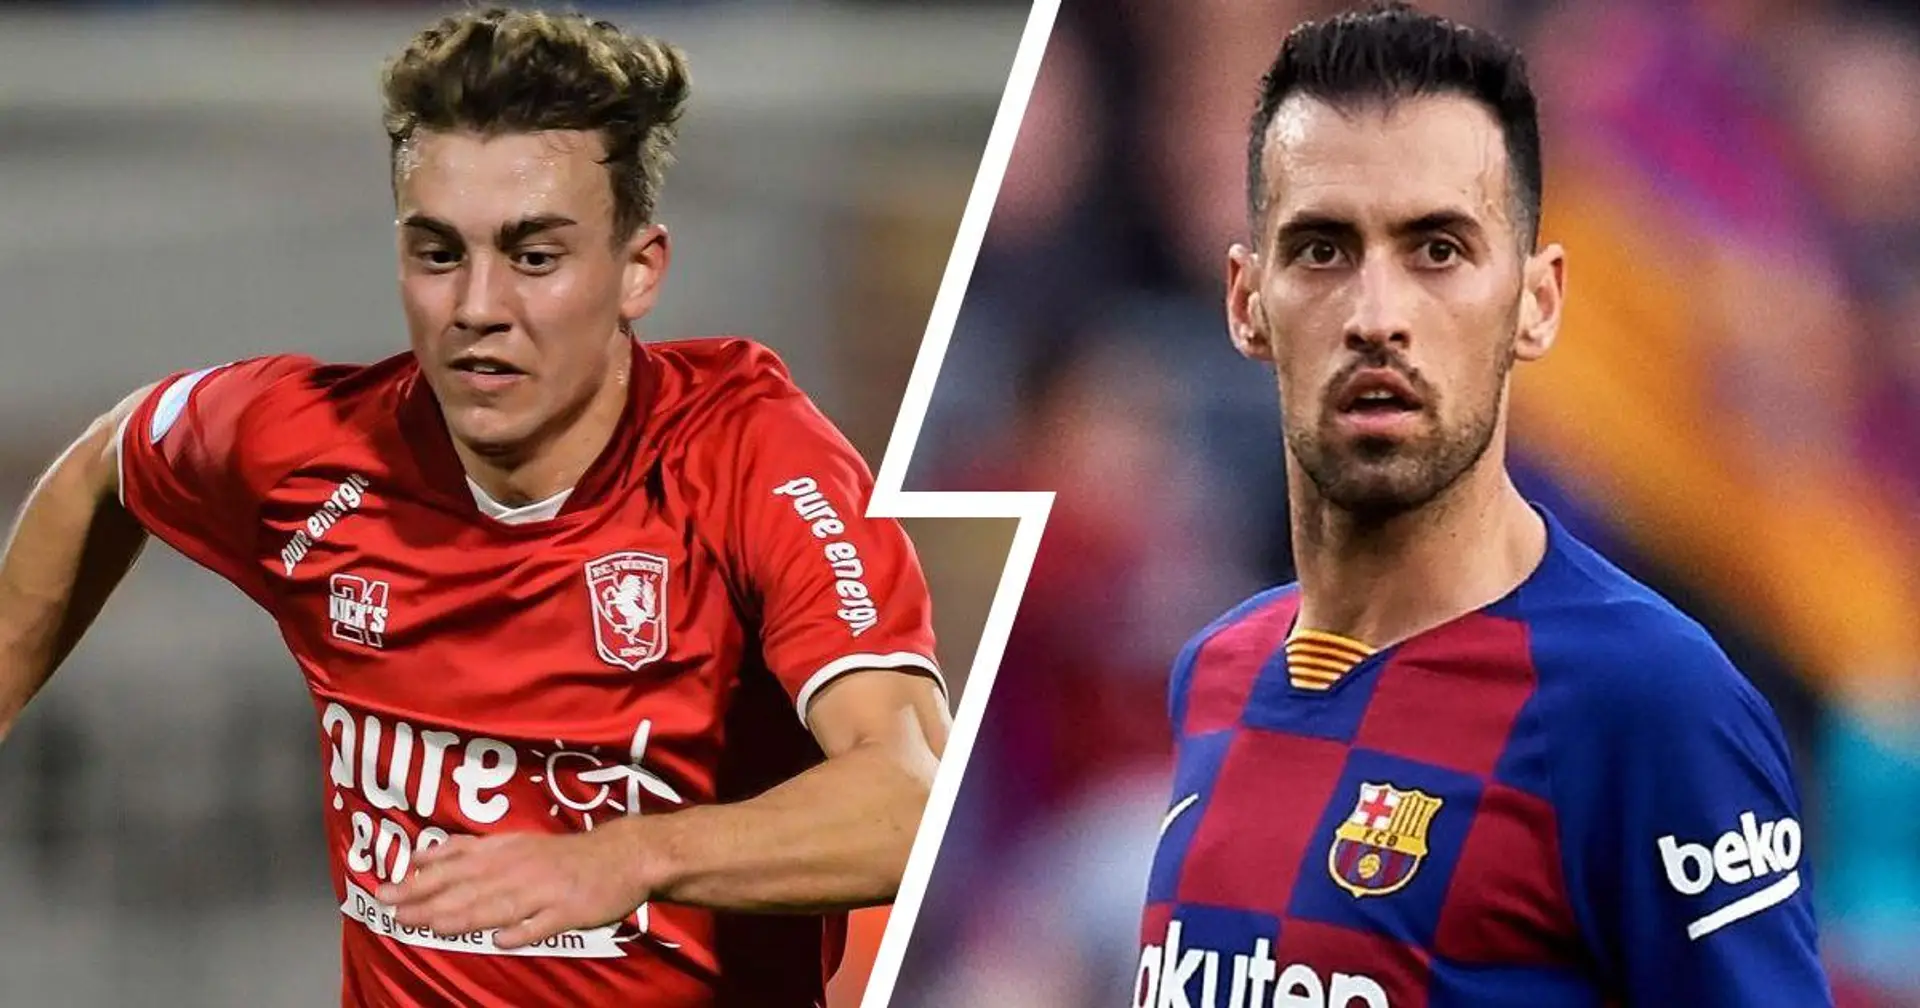 Oriol Busquets 'hopes' to replace his namesake in Barca's midfield